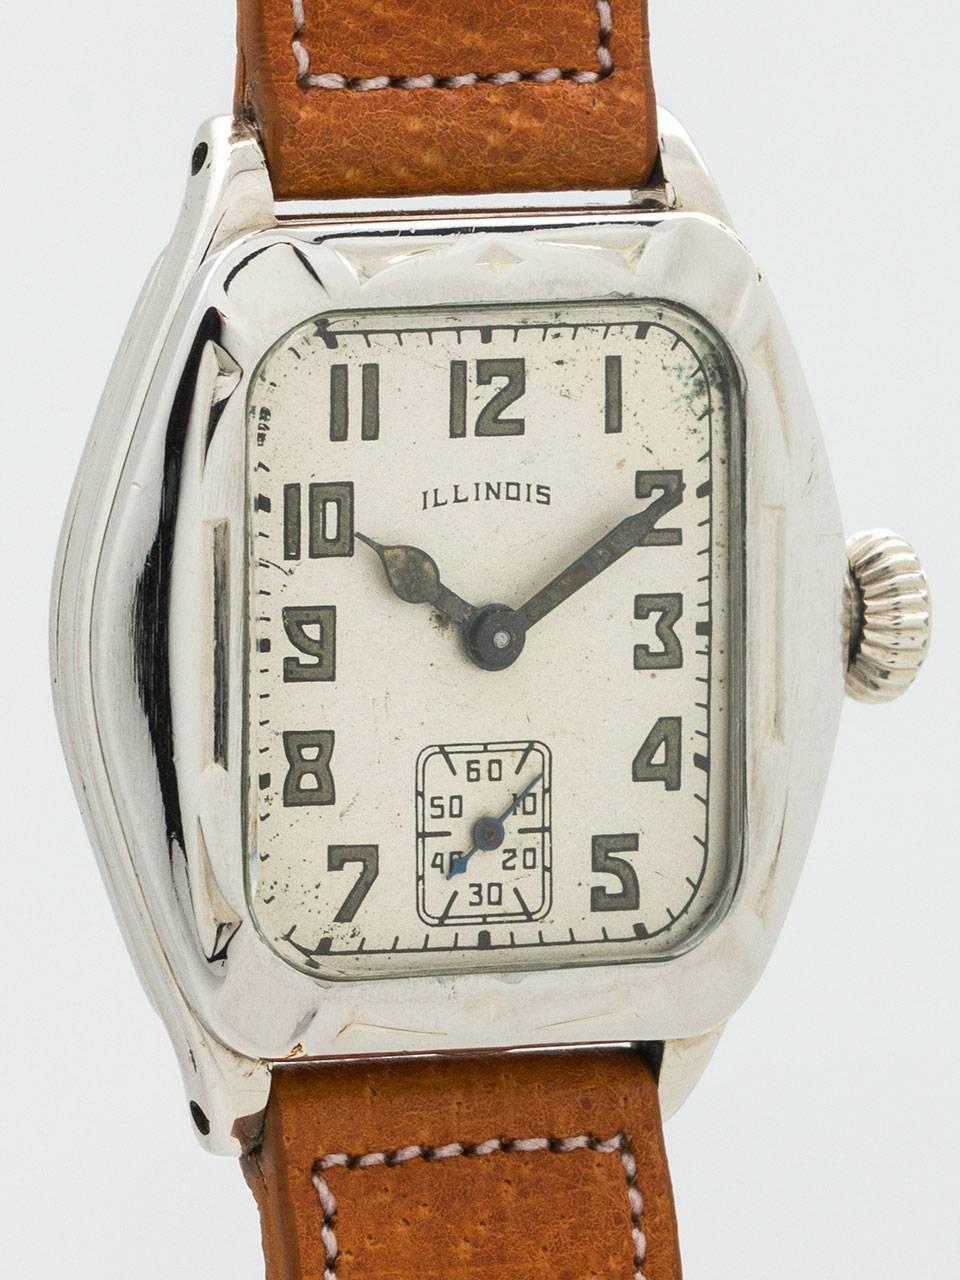 Illinois Viking 14K White Gold Filled circa 1929. Case measuring 30 x 38mm and featuring sculpted molded bezel and oversize onion style crown. Matte silver dial with patina’d luminous Arabic numerals and stylized hands. Powered by manual wind 17